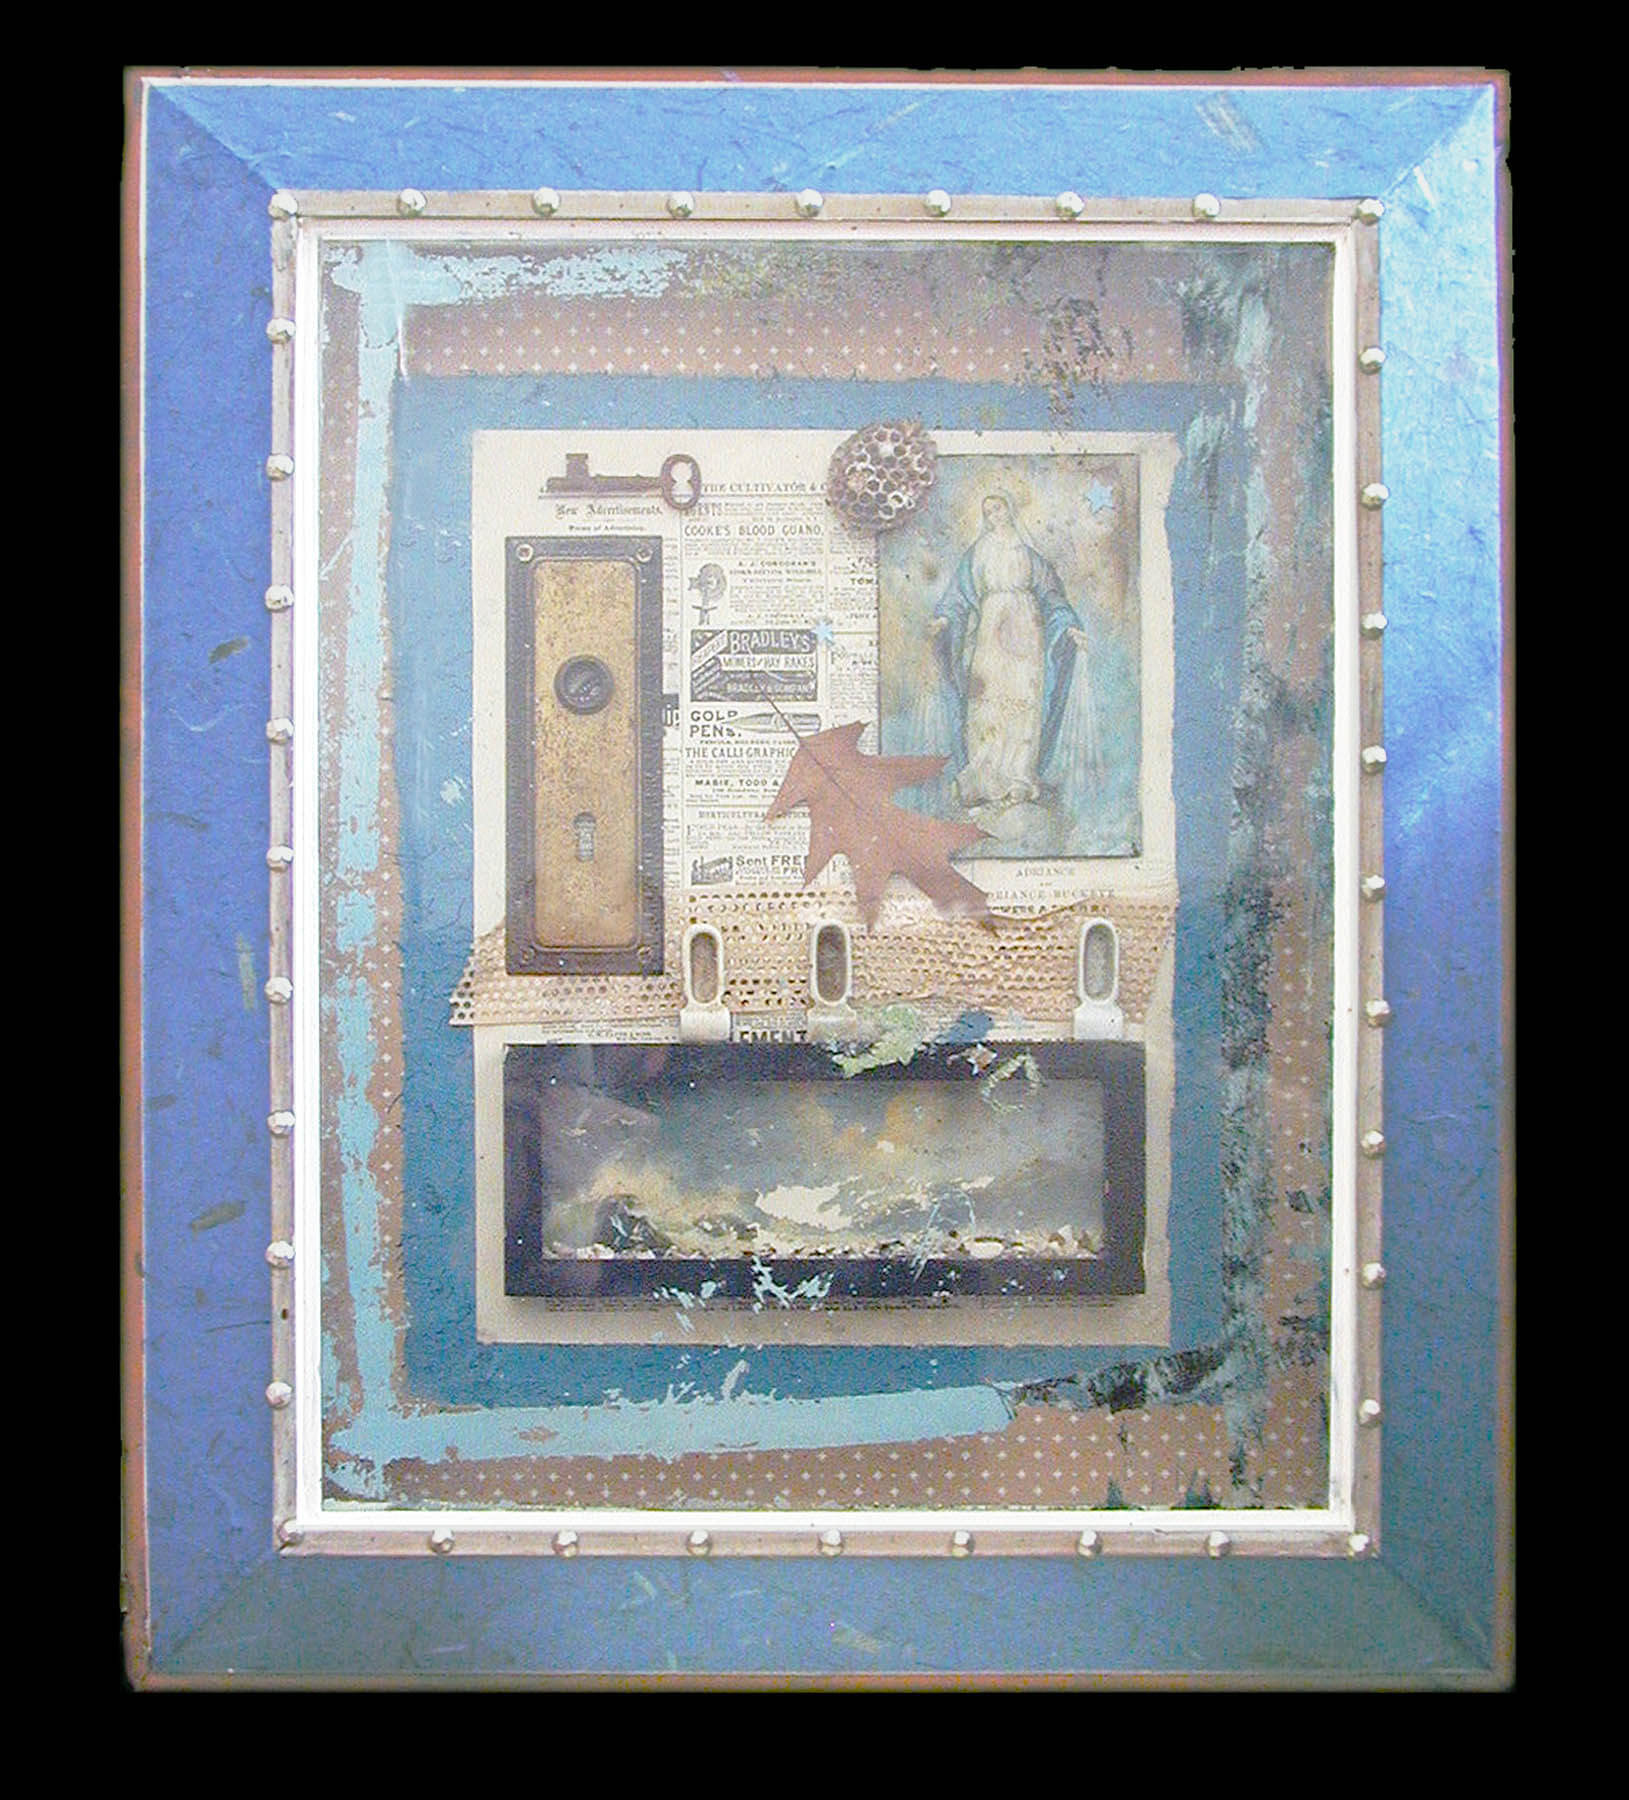 Collaged Diorama, “Country Gentleman's Dream #1or Blue Madonna” 2009.